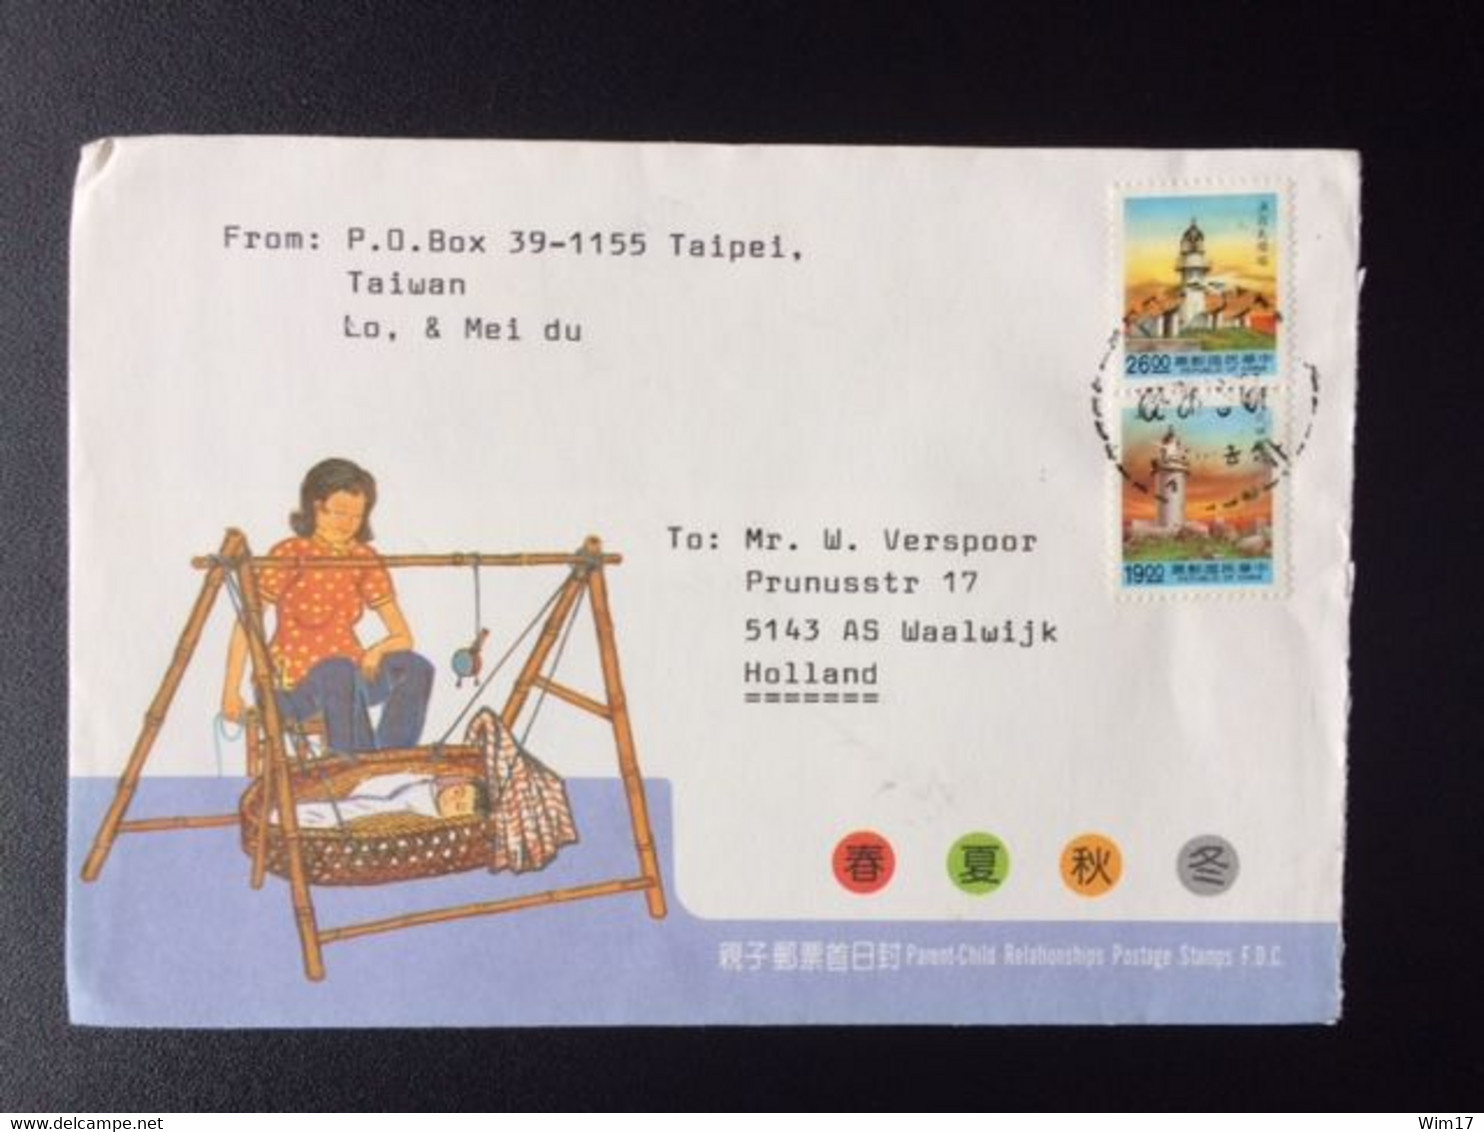 TAIWAN 1985 AIR MAIL LETTER LIGHTHOUSE - Enteros Postales